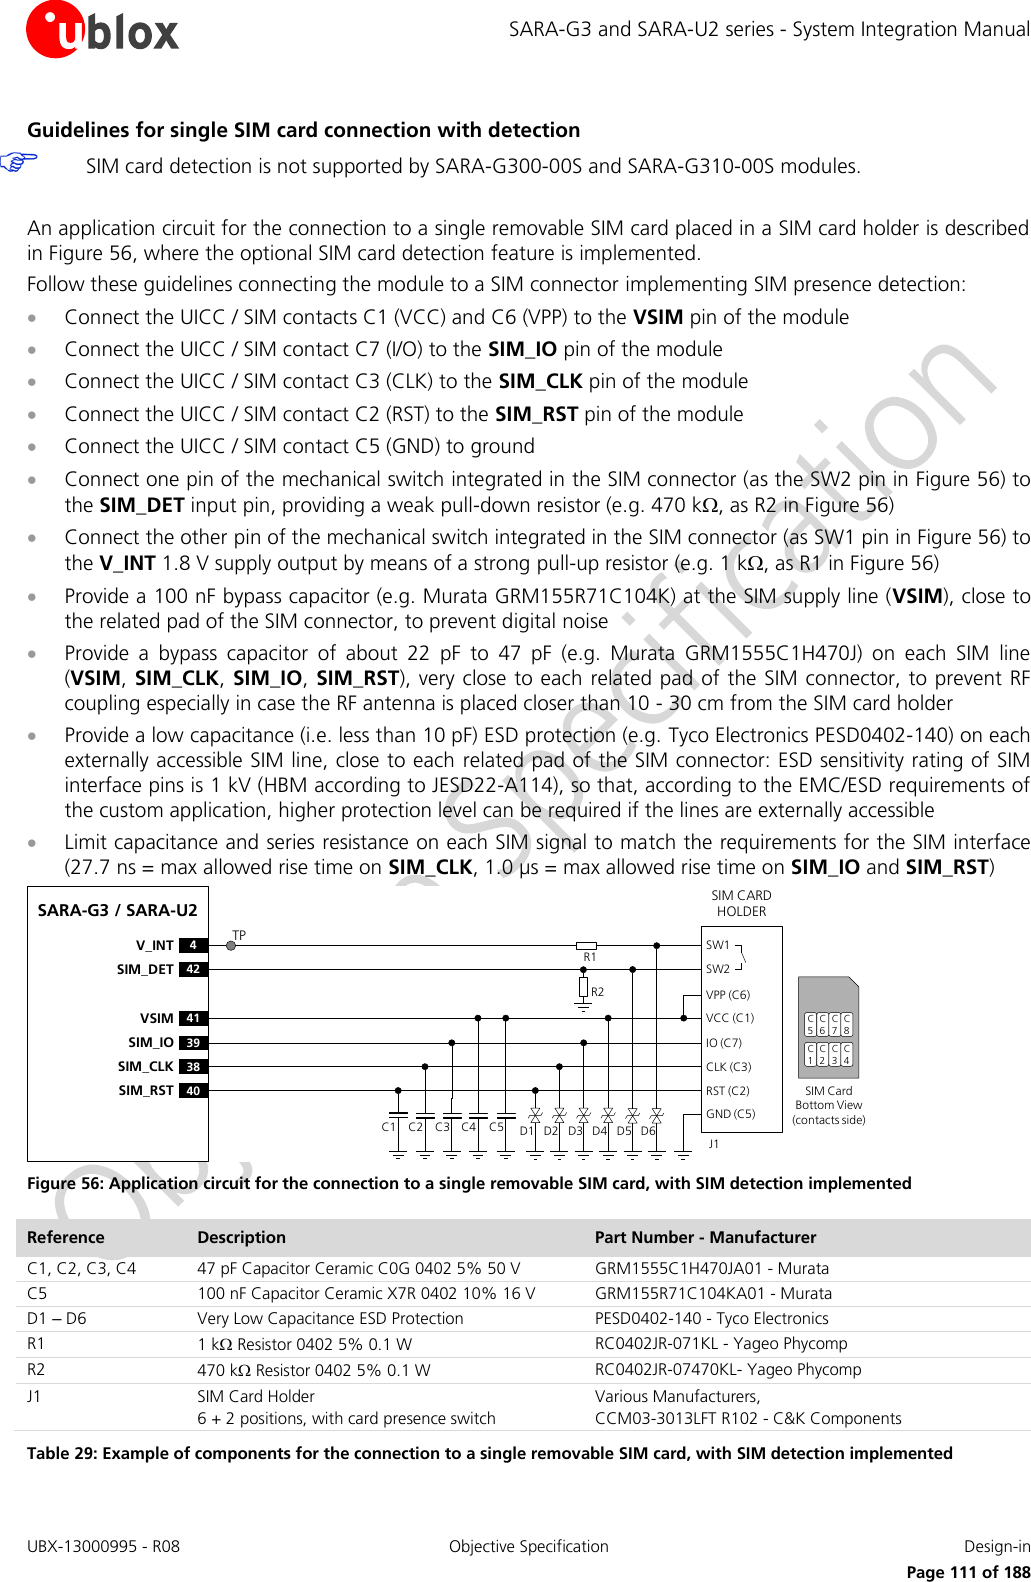 SARA-G3 and SARA-U2 series - System Integration Manual UBX-13000995 - R08  Objective Specification  Design-in     Page 111 of 188 Guidelines for single SIM card connection with detection  SIM card detection is not supported by SARA-G300-00S and SARA-G310-00S modules.  An application circuit for the connection to a single removable SIM card placed in a SIM card holder is described in Figure 56, where the optional SIM card detection feature is implemented. Follow these guidelines connecting the module to a SIM connector implementing SIM presence detection:  Connect the UICC / SIM contacts C1 (VCC) and C6 (VPP) to the VSIM pin of the module  Connect the UICC / SIM contact C7 (I/O) to the SIM_IO pin of the module  Connect the UICC / SIM contact C3 (CLK) to the SIM_CLK pin of the module  Connect the UICC / SIM contact C2 (RST) to the SIM_RST pin of the module  Connect the UICC / SIM contact C5 (GND) to ground  Connect one pin of the mechanical switch integrated in the SIM connector (as the SW2 pin in Figure 56) to the SIM_DET input pin, providing a weak pull-down resistor (e.g. 470 k, as R2 in Figure 56)  Connect the other pin of the mechanical switch integrated in the SIM connector (as SW1 pin in Figure 56) to the V_INT 1.8 V supply output by means of a strong pull-up resistor (e.g. 1 k, as R1 in Figure 56)  Provide a 100 nF bypass capacitor (e.g. Murata GRM155R71C104K) at the SIM supply line (VSIM), close to the related pad of the SIM connector, to prevent digital noise   Provide  a  bypass  capacitor  of  about  22  pF  to  47  pF  (e.g.  Murata  GRM1555C1H470J)  on  each  SIM  line (VSIM, SIM_CLK, SIM_IO, SIM_RST), very close to each related pad of the SIM connector, to prevent RF coupling especially in case the RF antenna is placed closer than 10 - 30 cm from the SIM card holder  Provide a low capacitance (i.e. less than 10 pF) ESD protection (e.g. Tyco Electronics PESD0402-140) on each externally accessible SIM line, close to each related pad of the SIM connector: ESD sensitivity rating of SIM interface pins is 1 kV (HBM according to JESD22-A114), so that, according to the EMC/ESD requirements of the custom application, higher protection level can be required if the lines are externally accessible   Limit capacitance and series resistance on each SIM signal to match the requirements for the SIM interface (27.7 ns = max allowed rise time on SIM_CLK, 1.0 µs = max allowed rise time on SIM_IO and SIM_RST) SARA-G3 / SARA-U241VSIM39SIM_IO38SIM_CLK40SIM_RST4V_INT42SIM_DETSIM CARD HOLDERC5C6C7C1C2C3SIM Card Bottom View (contacts side)C1VPP (C6)VCC (C1)IO (C7)CLK (C3)RST (C2)GND (C5)C2 C3 C5J1C4SW1SW2D1 D2 D3 D4 D5 D6R2R1C8C4TP Figure 56: Application circuit for the connection to a single removable SIM card, with SIM detection implemented Reference Description Part Number - Manufacturer C1, C2, C3, C4 47 pF Capacitor Ceramic C0G 0402 5% 50 V GRM1555C1H470JA01 - Murata C5 100 nF Capacitor Ceramic X7R 0402 10% 16 V GRM155R71C104KA01 - Murata D1 – D6 Very Low Capacitance ESD Protection PESD0402-140 - Tyco Electronics  R1 1 k Resistor 0402 5% 0.1 W RC0402JR-071KL - Yageo Phycomp R2 470 k Resistor 0402 5% 0.1 W RC0402JR-07470KL- Yageo Phycomp J1 SIM Card Holder 6 + 2 positions, with card presence switch Various Manufacturers, CCM03-3013LFT R102 - C&amp;K Components Table 29: Example of components for the connection to a single removable SIM card, with SIM detection implemented  